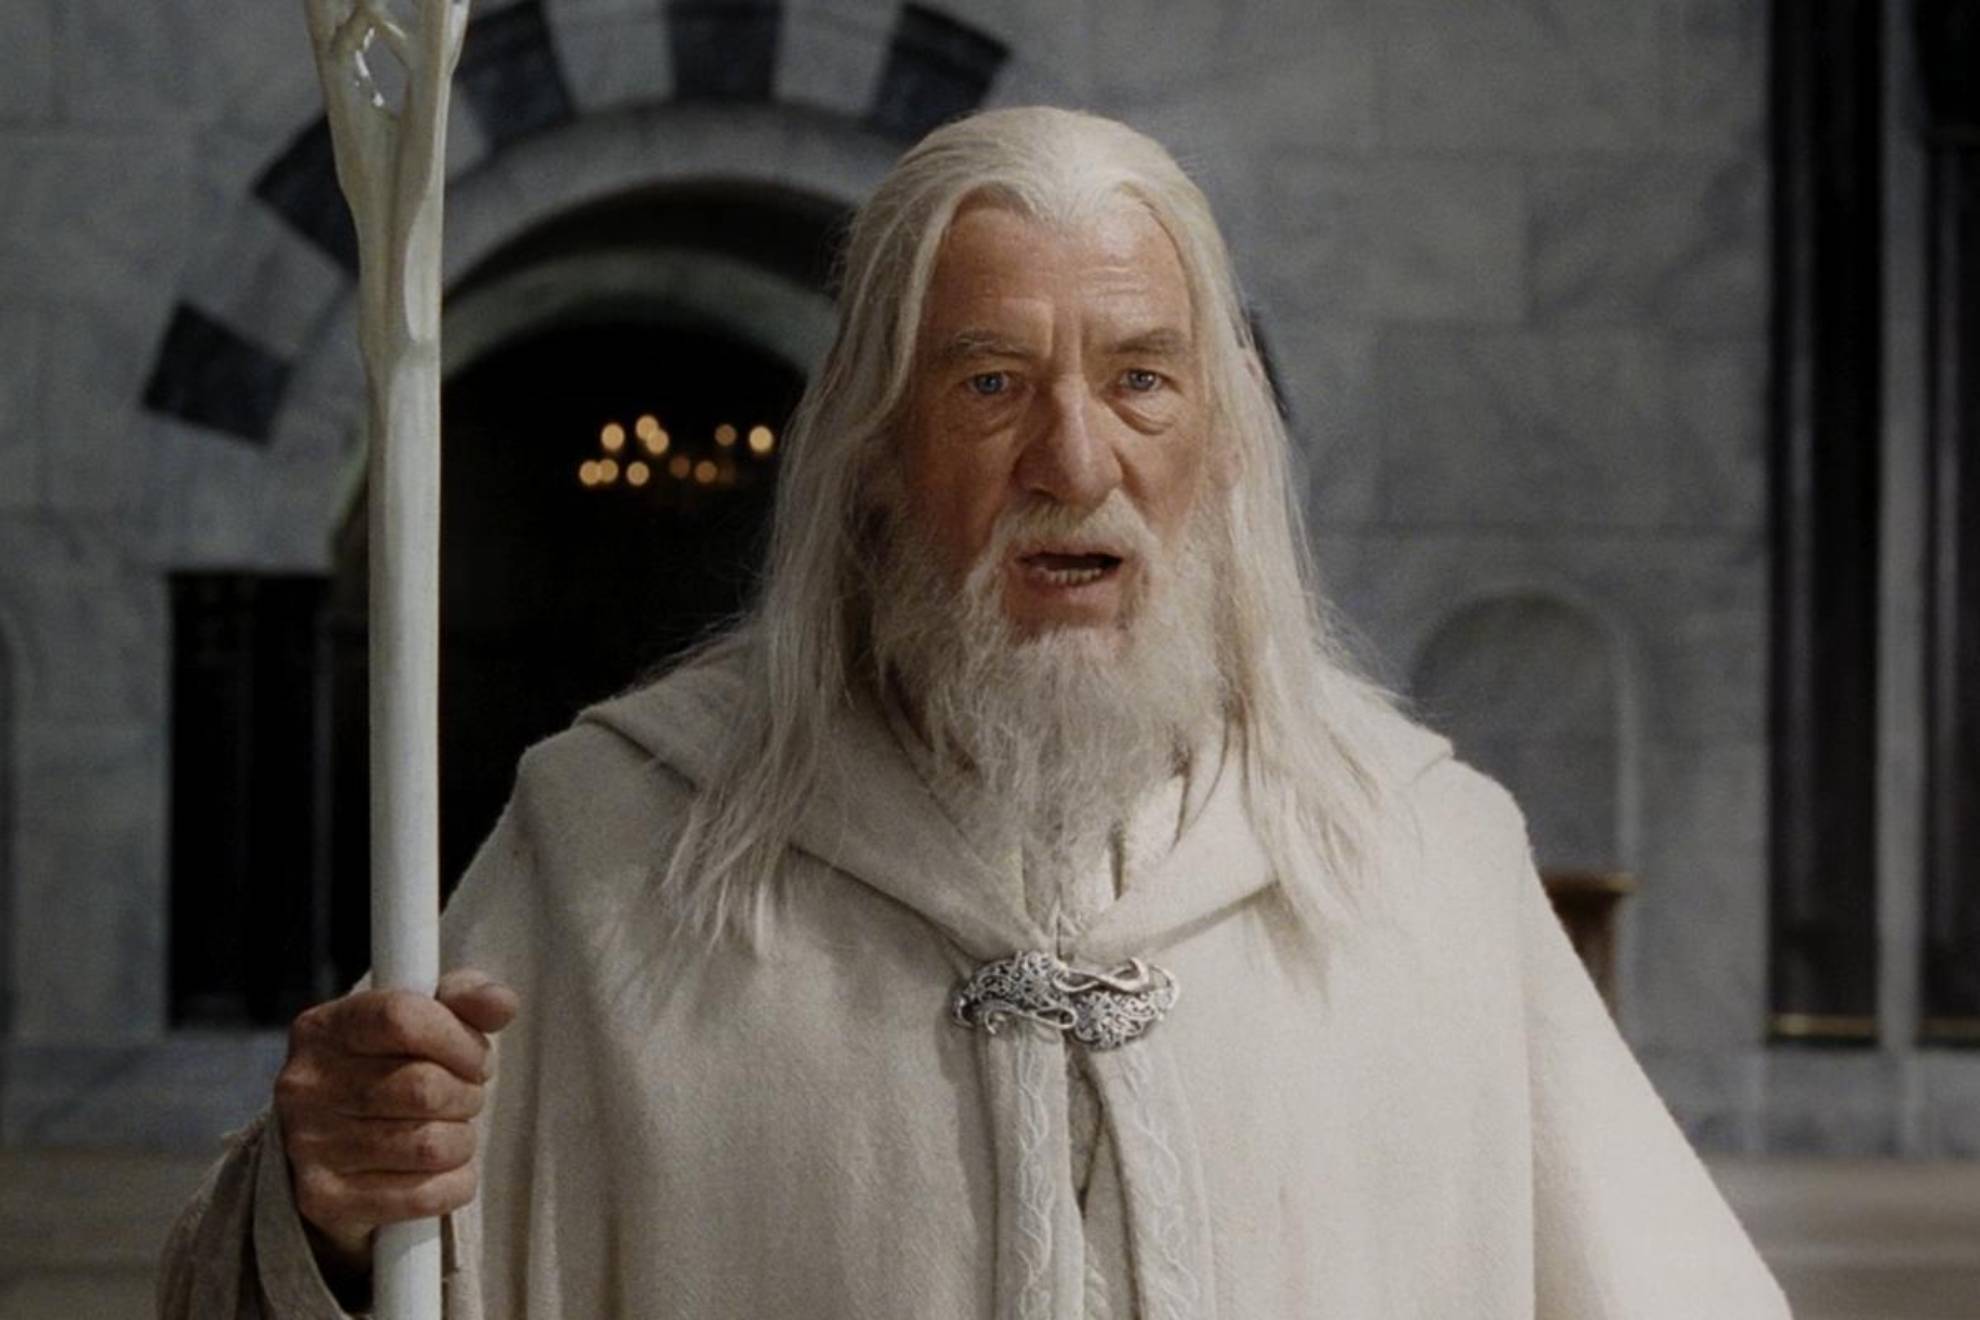 Ian McKellen in 'The Lord of the Rings'